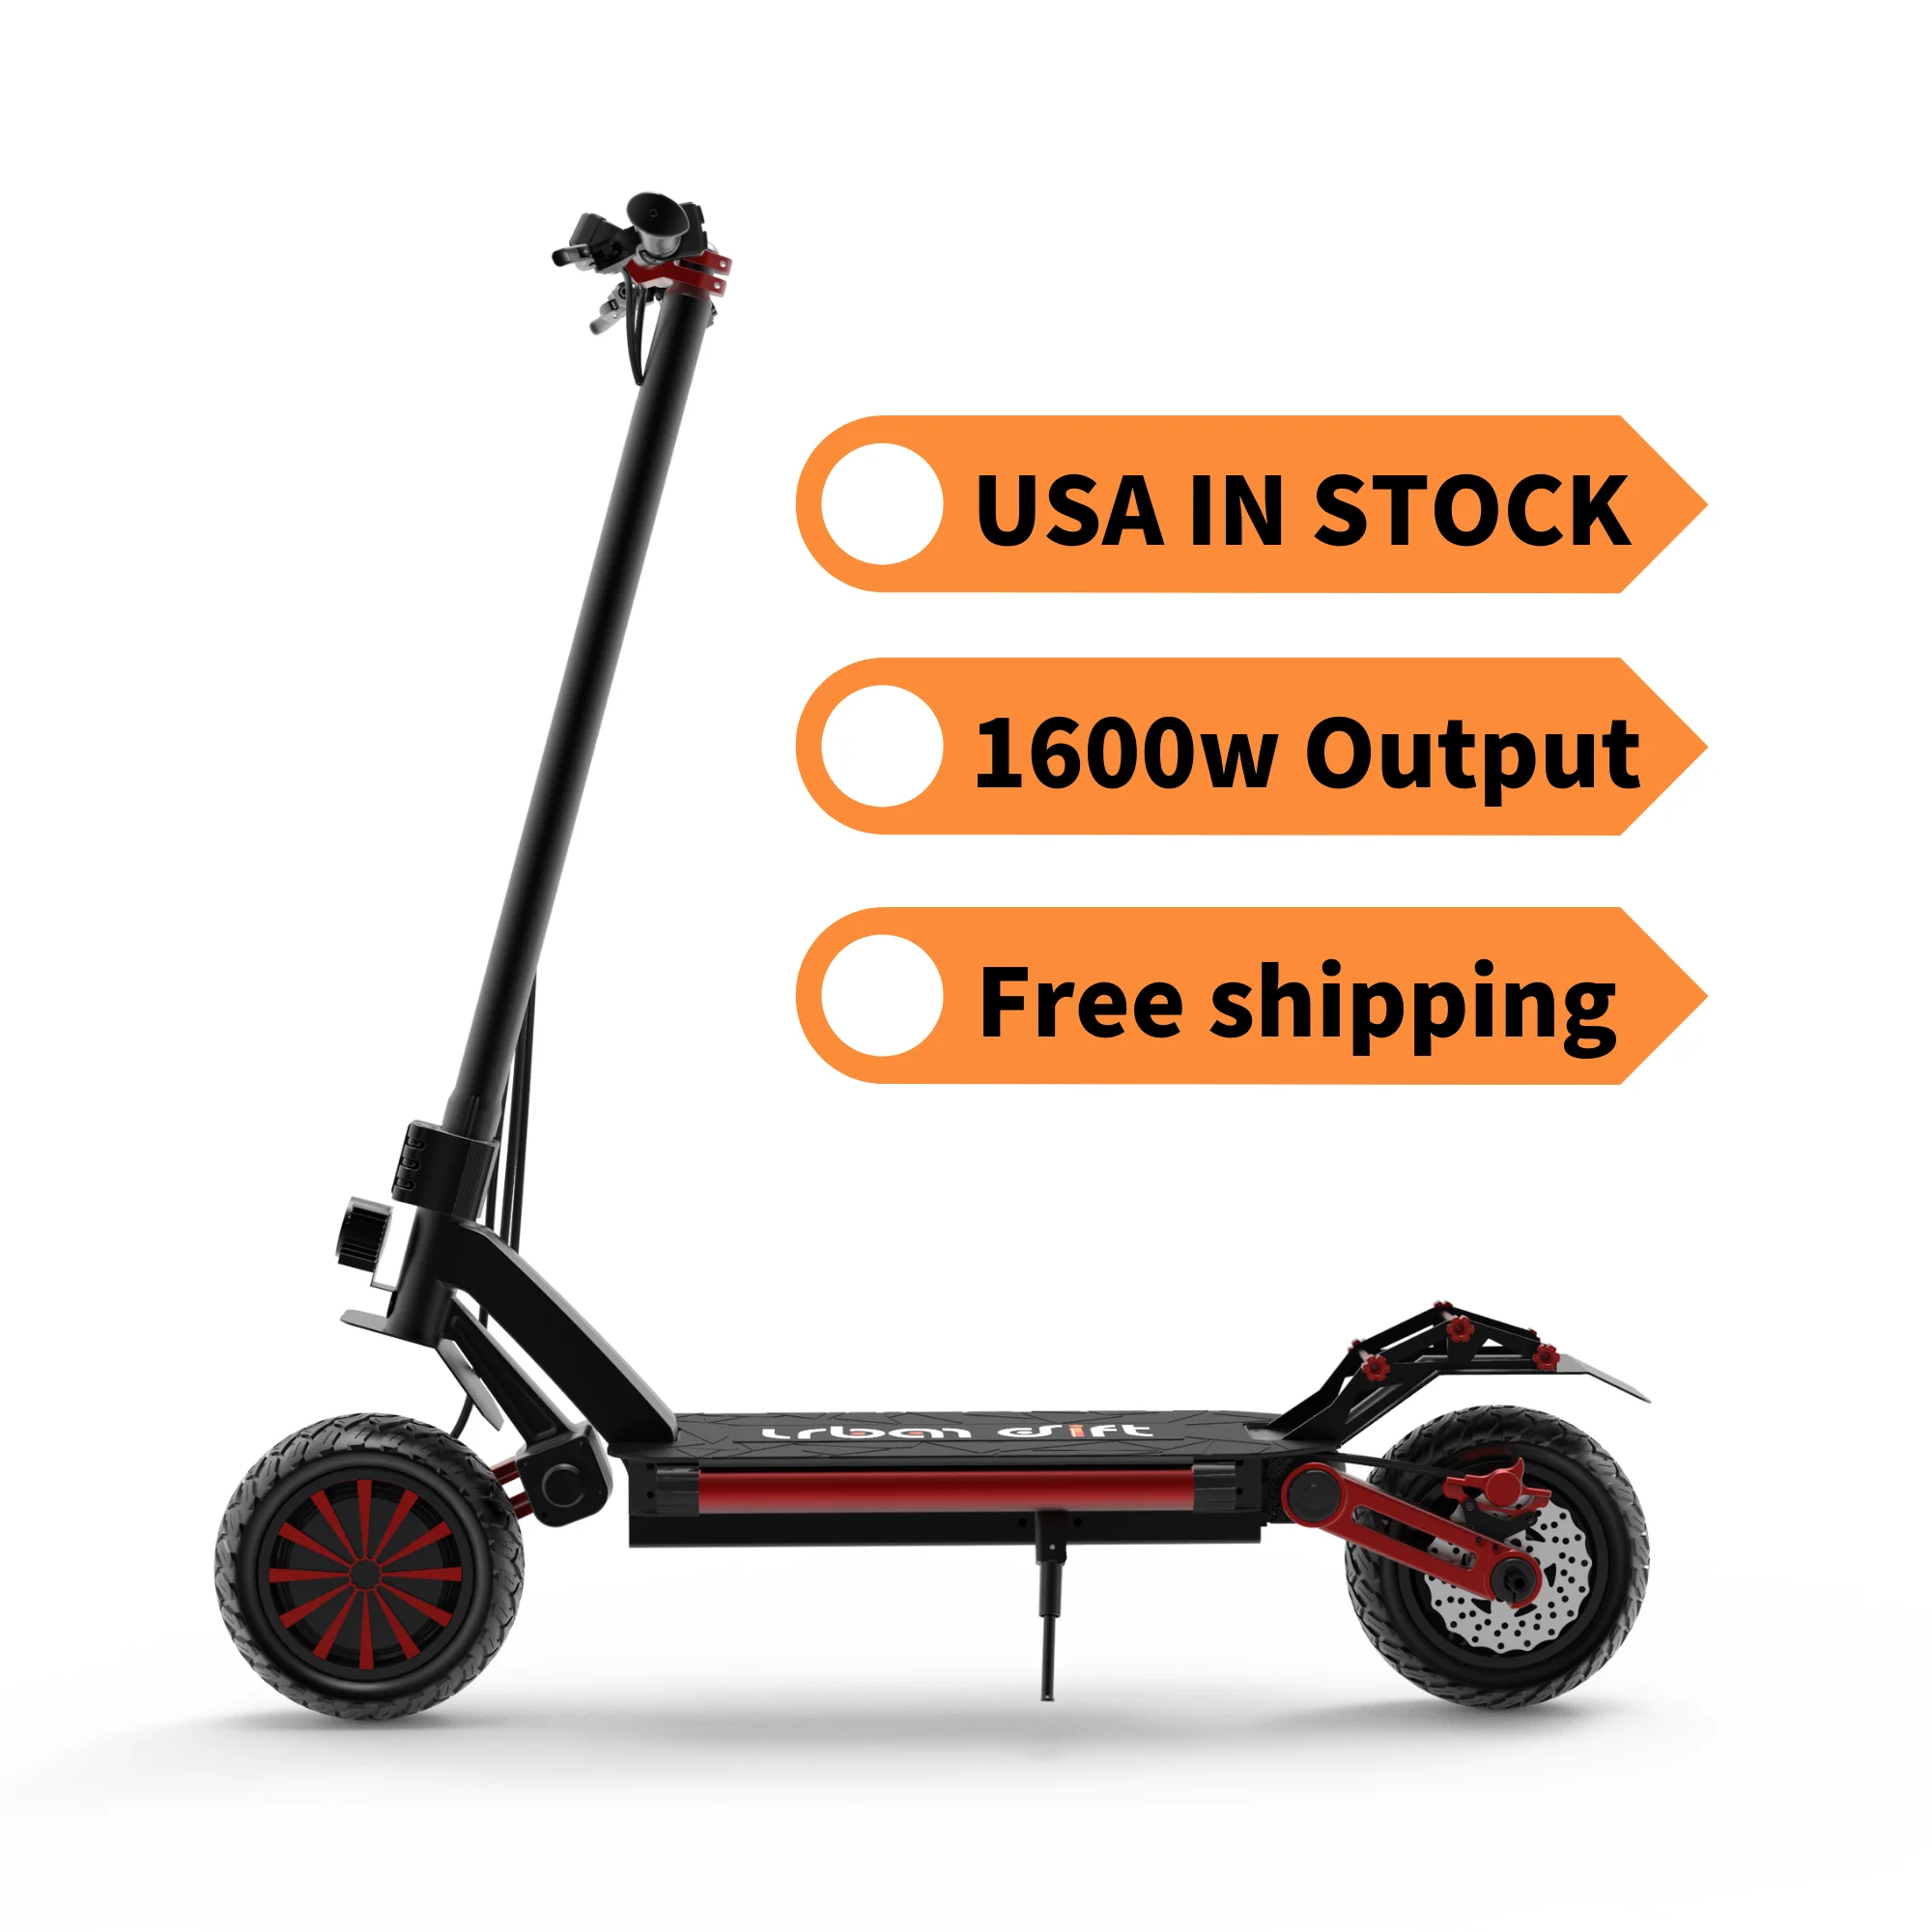 

2000w 10 Inch 52v Long Range 65-85kms Dualtron hydraulic oil brake single/Dual Motor max speed 65km Adult Electric Kick Scooter